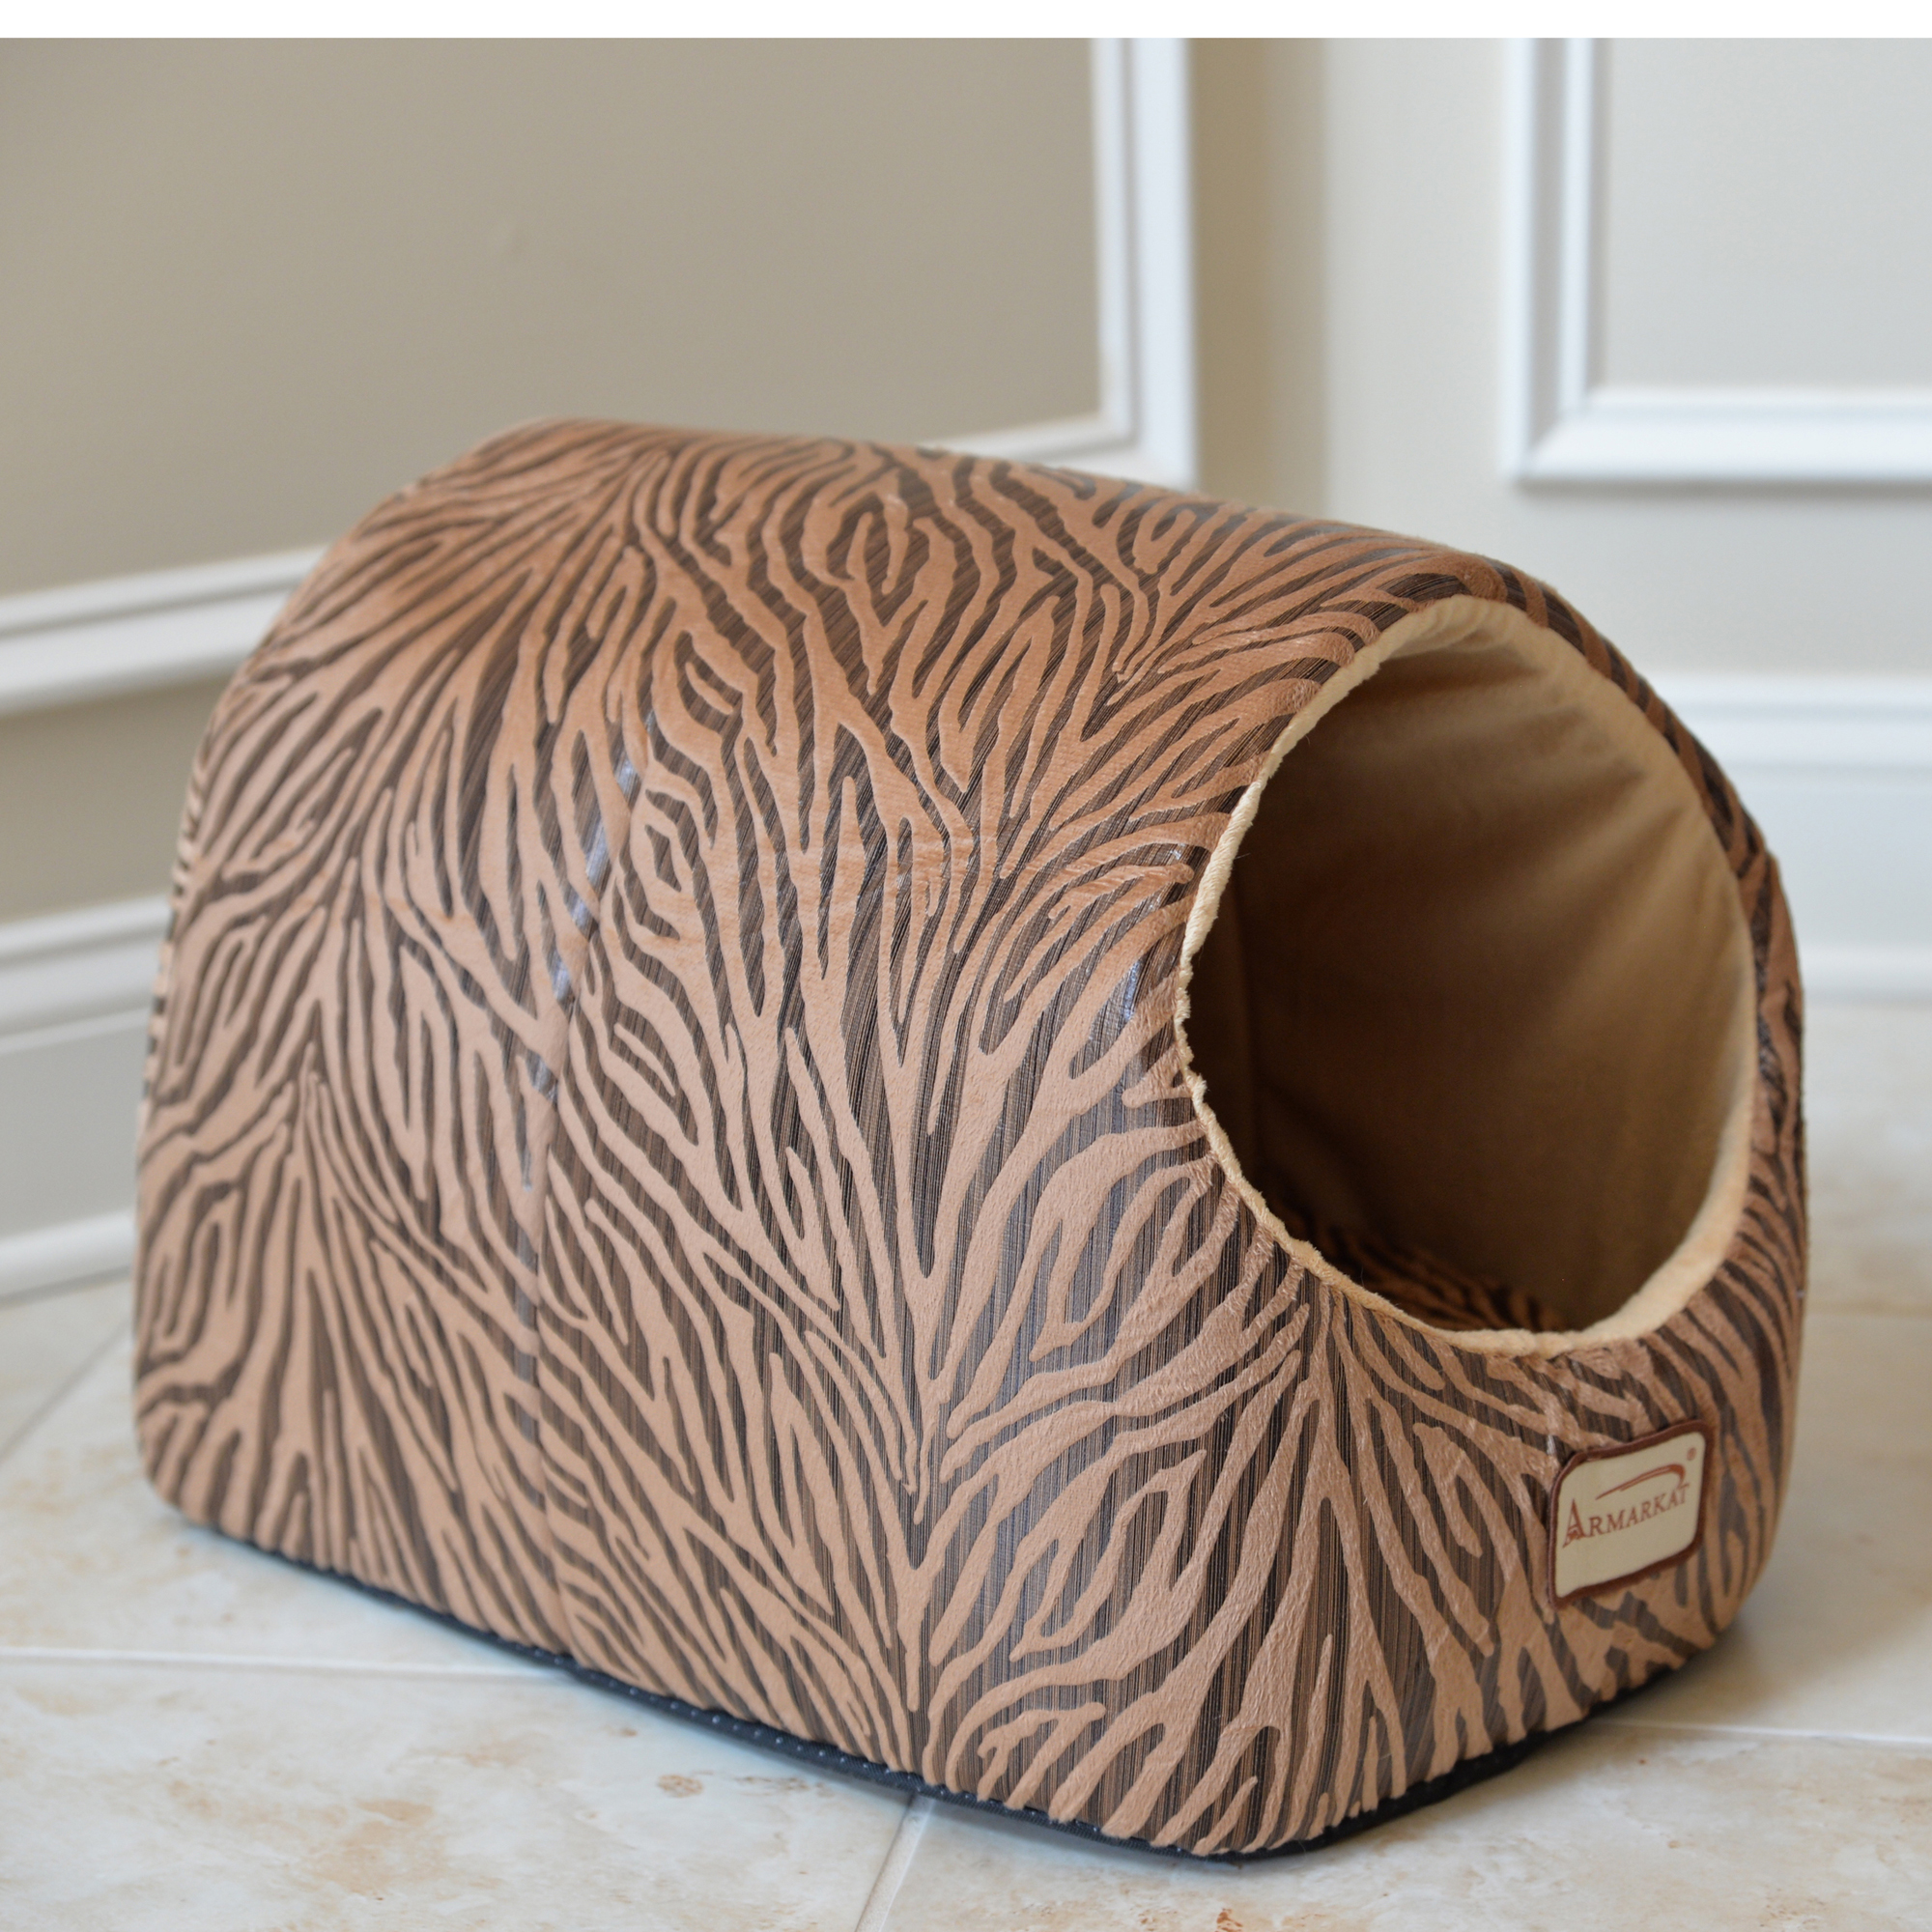 C11hbw-mh Armarkat Cat Bed, Bronzing And Beige C11hbw-mh